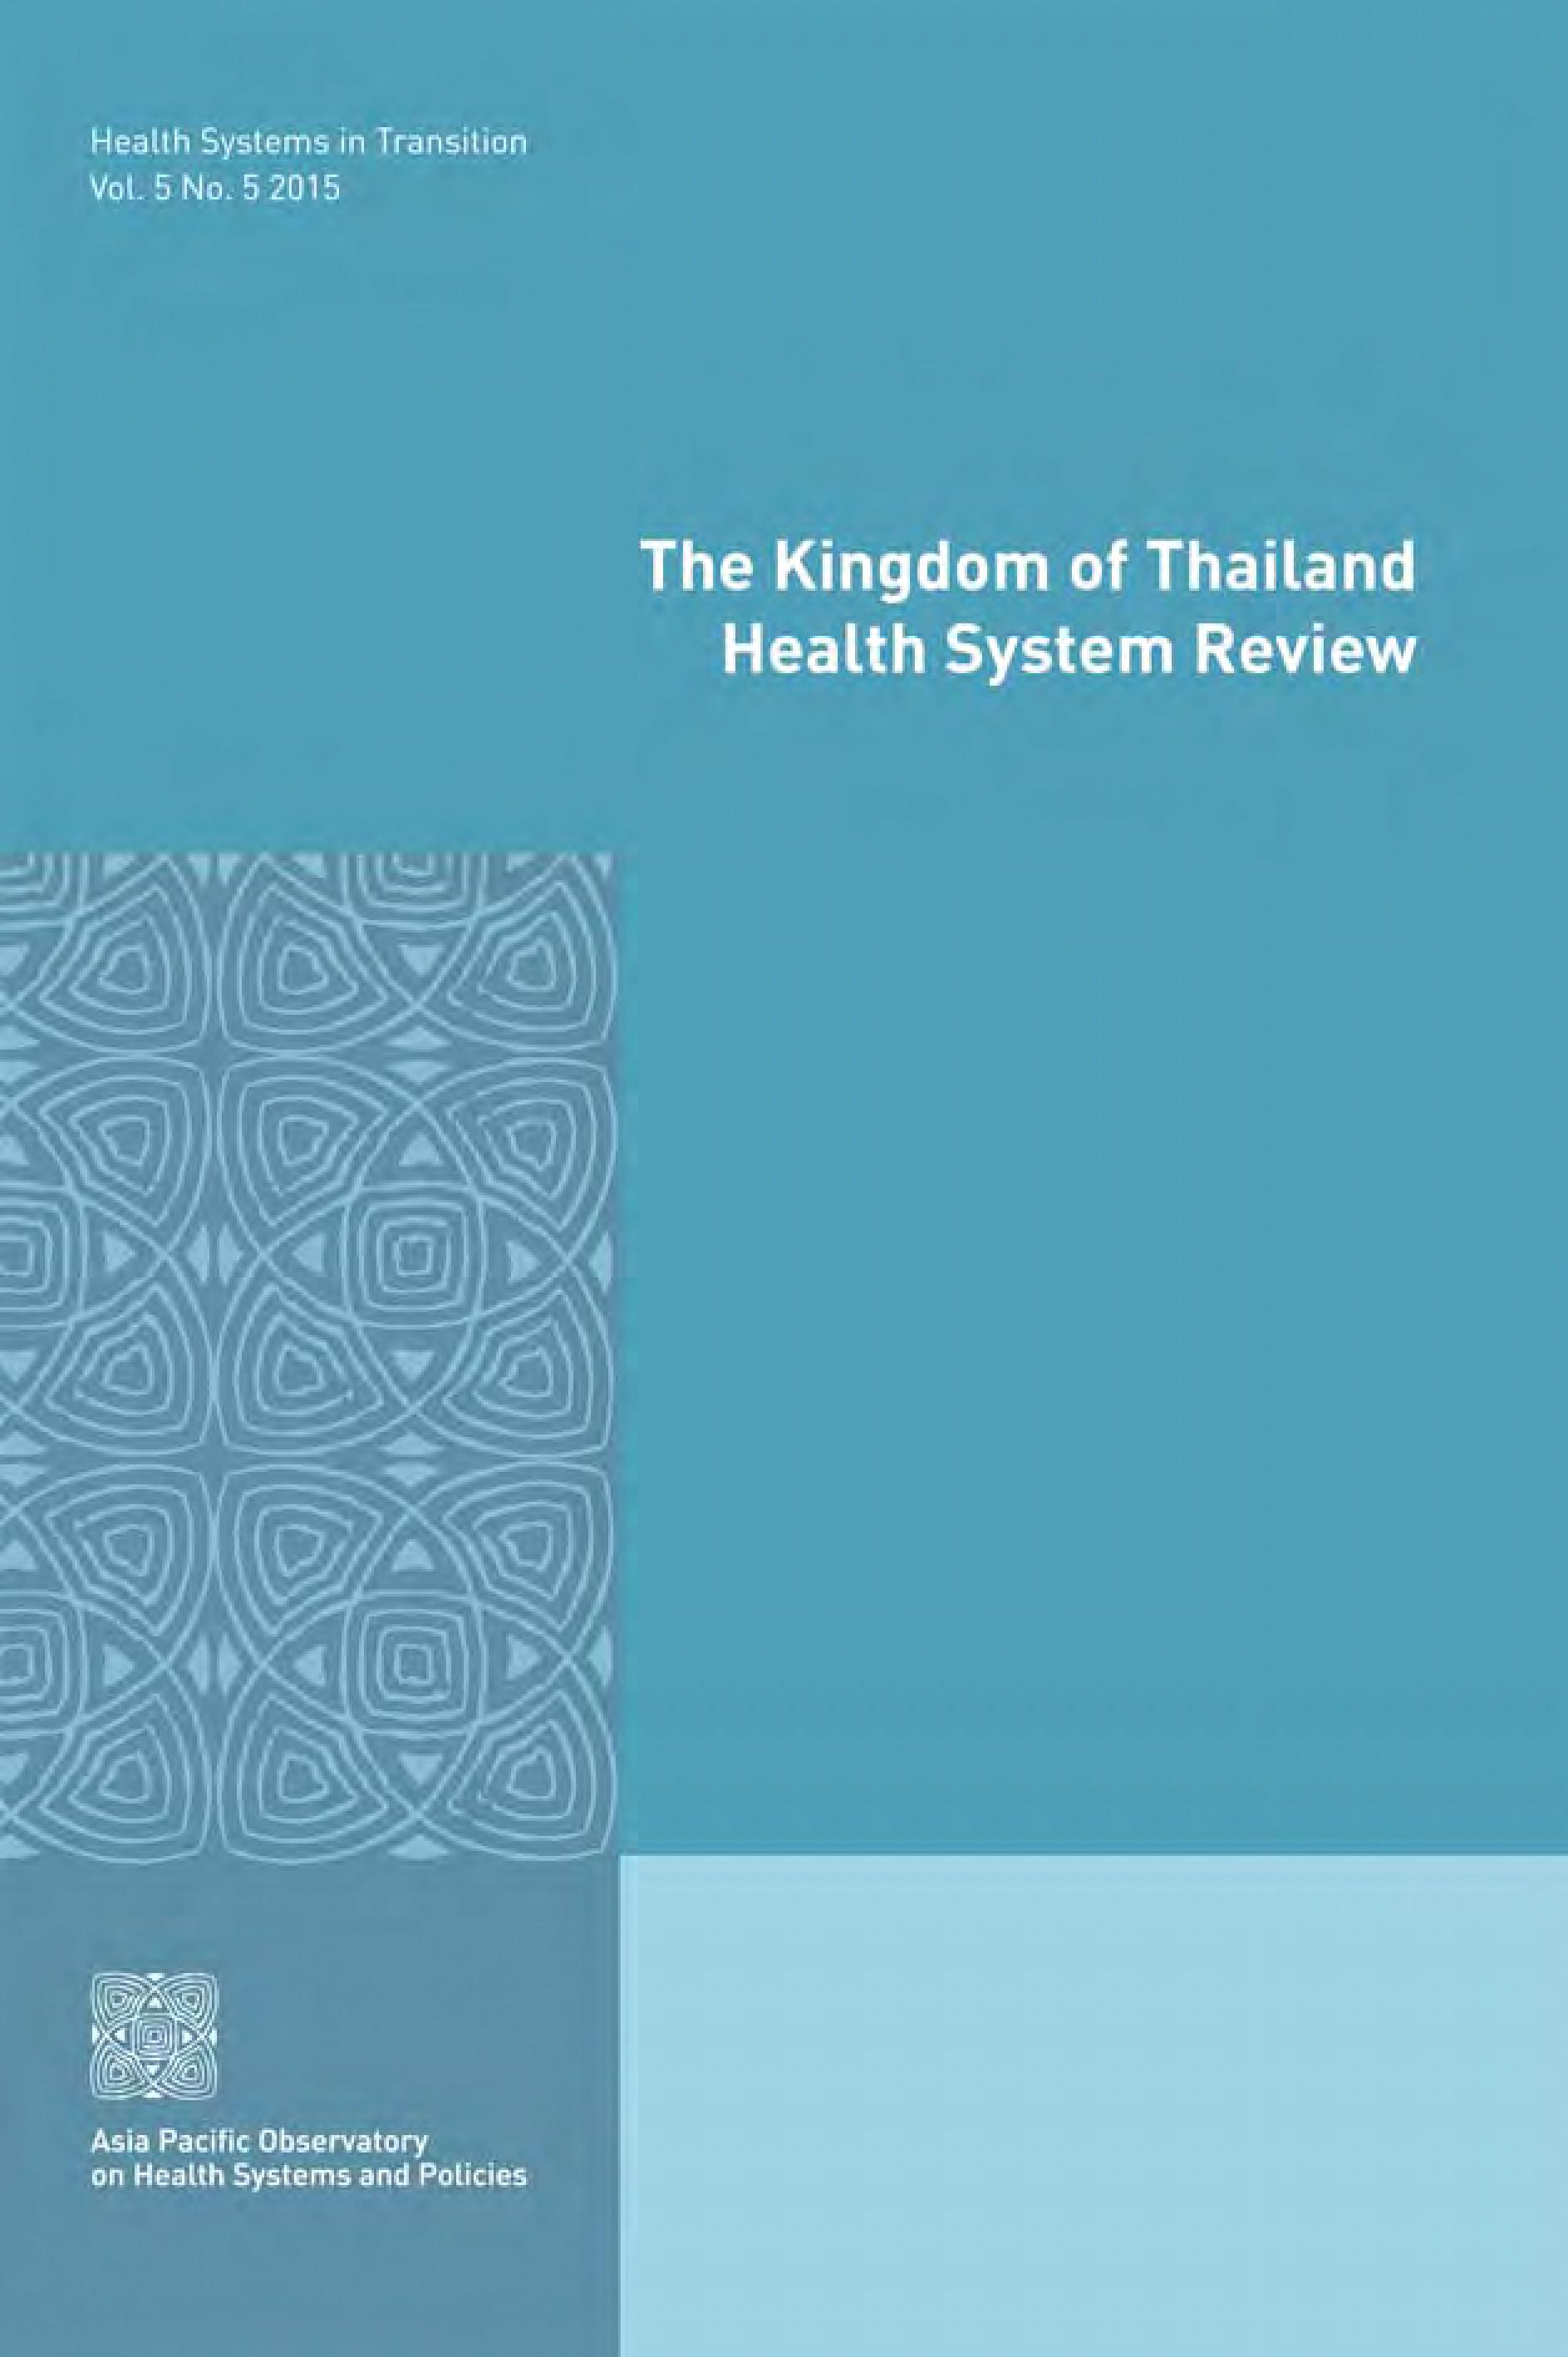 The Kingdom of Thailand Health System Review